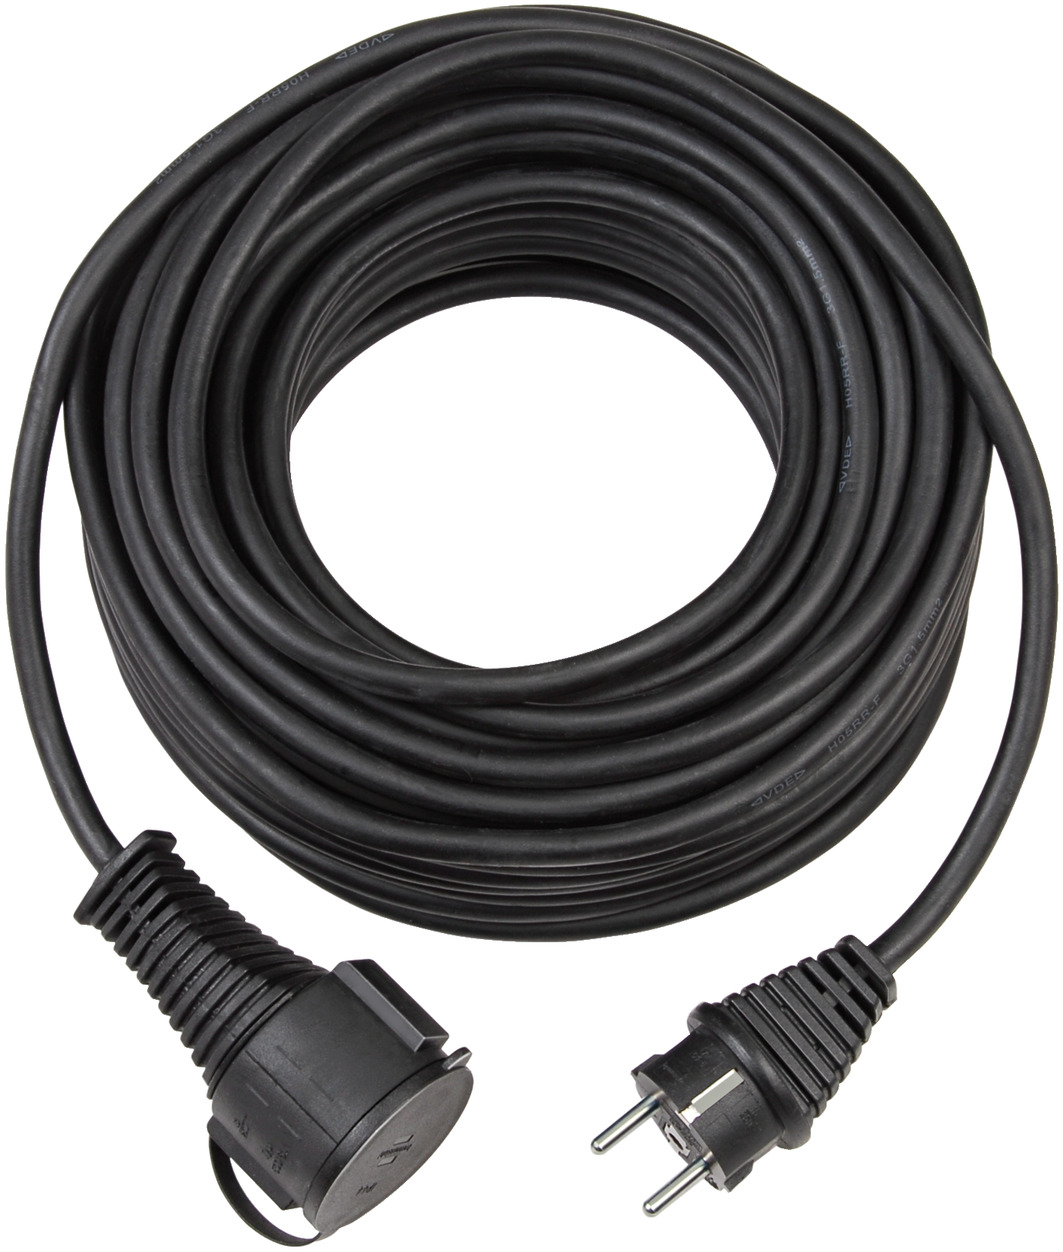 rubber black | H05RR-F cable 3G1,5 IP44 Quality brennenstuhl® 5m extension